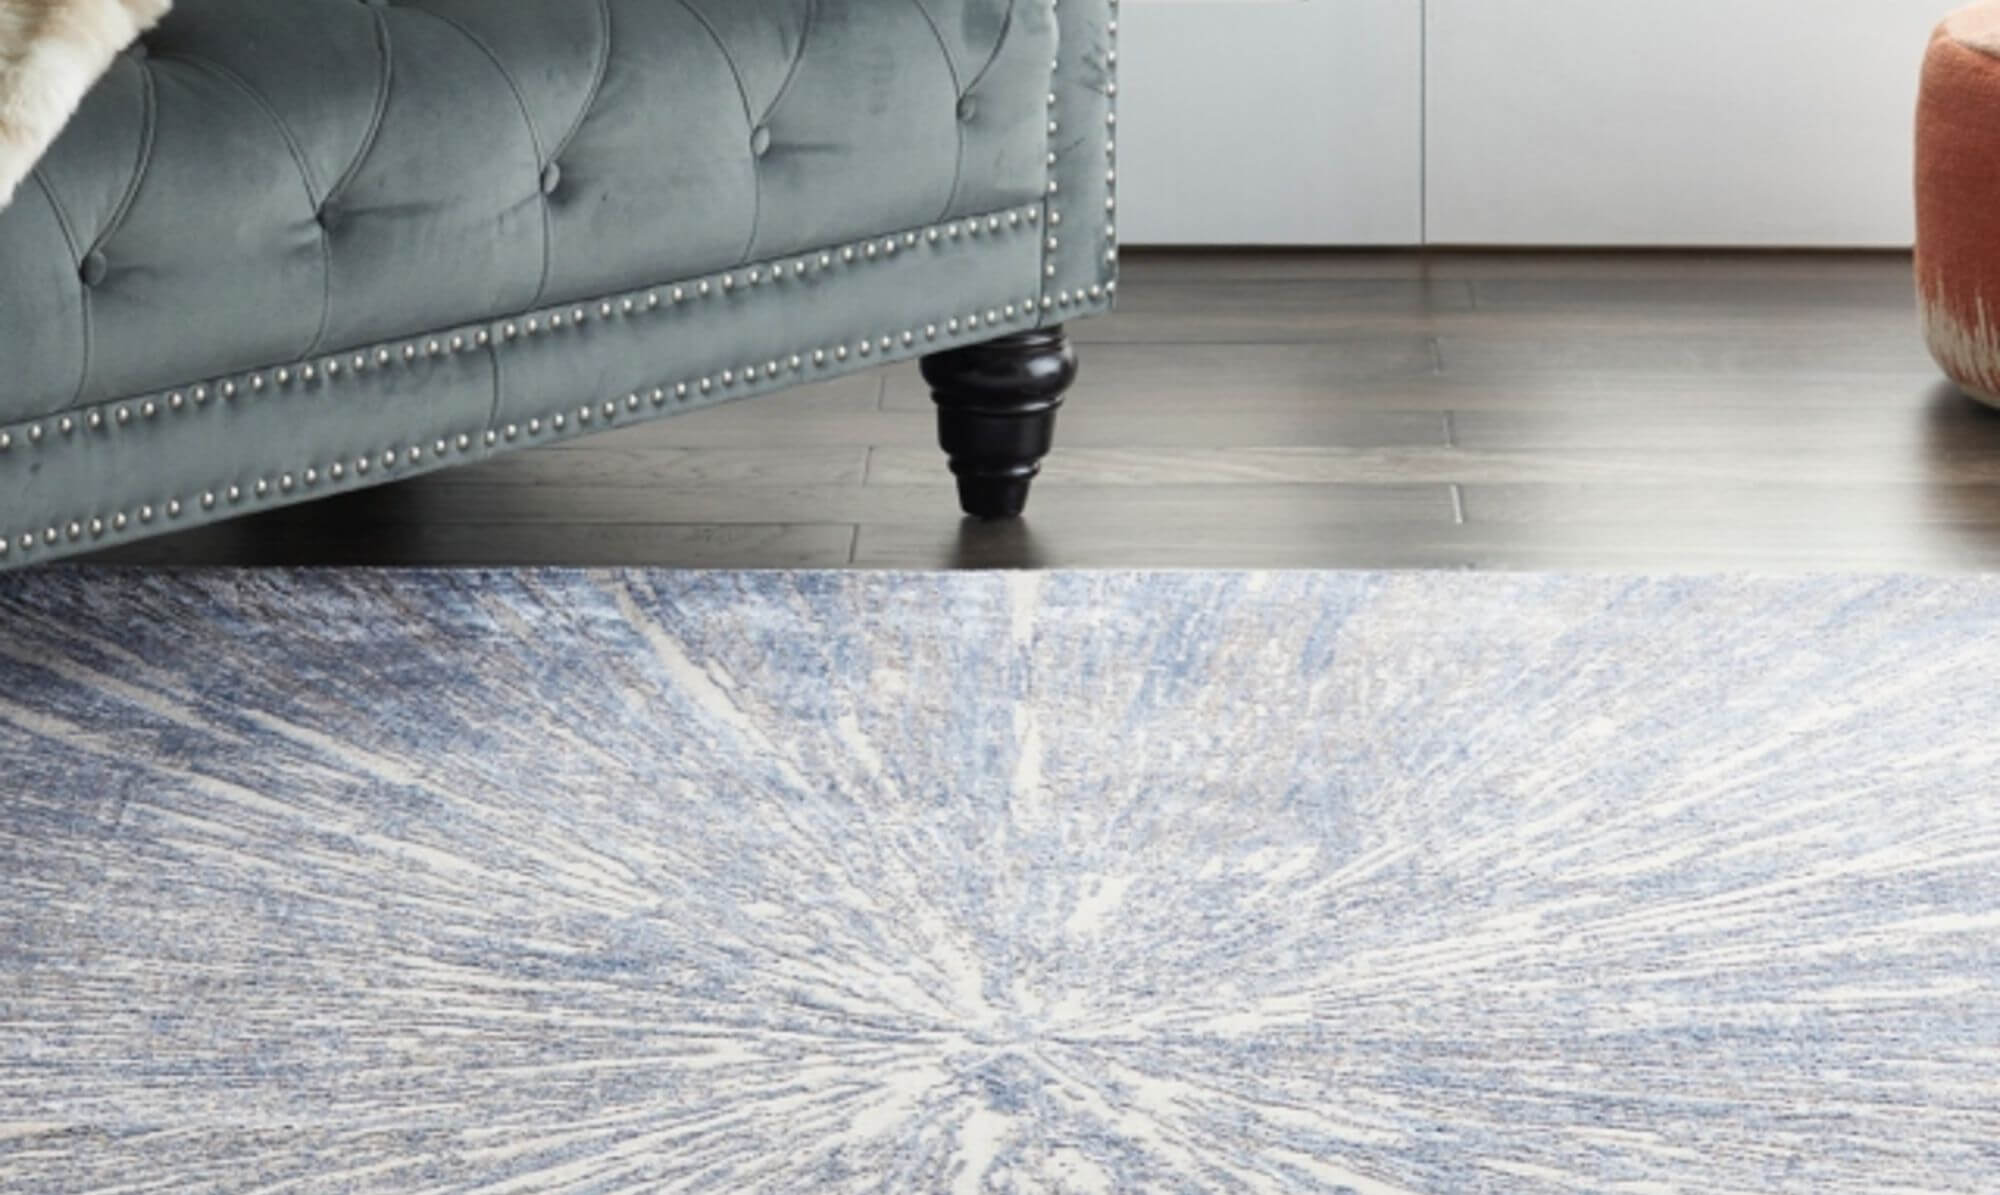 How to stops rug moving on carpet – Fishpools